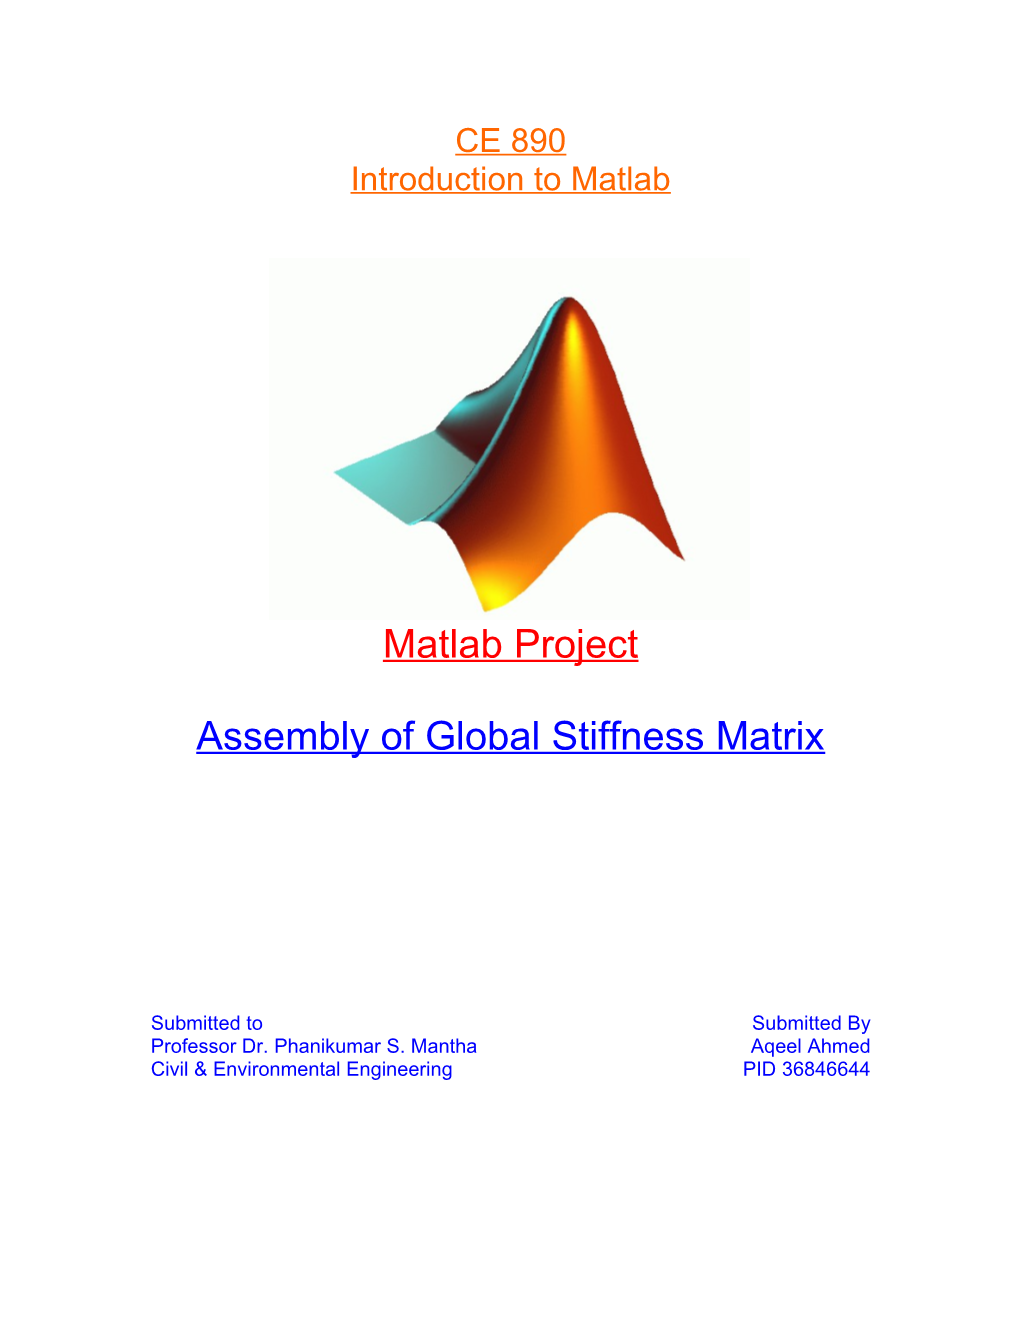 Assembling the Global Stiffness Matrix for Spring Elements